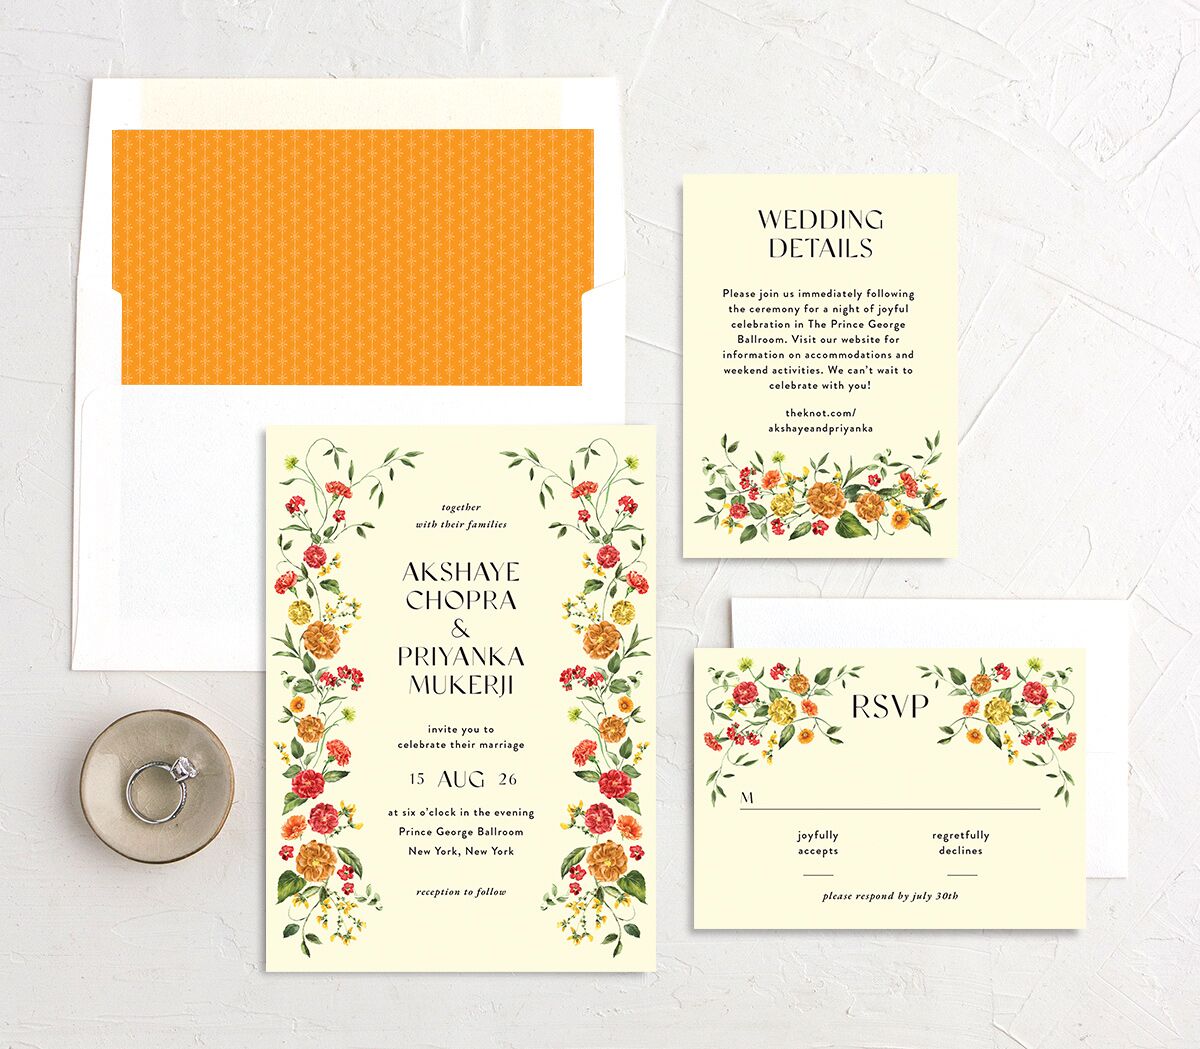 Ascending Garland Wedding Invitations suite in yellow